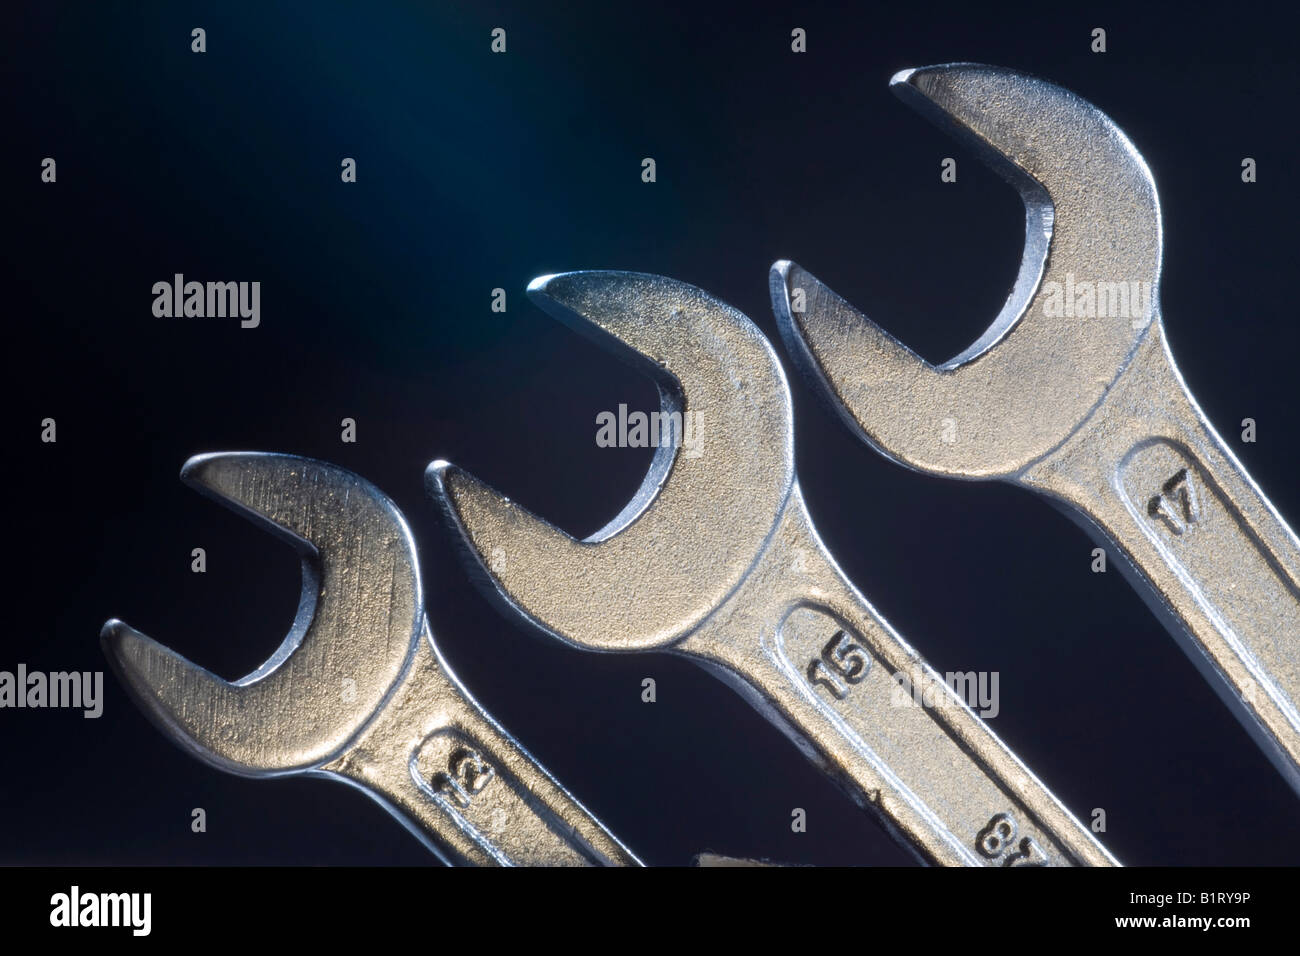 Wrench Stock Photo